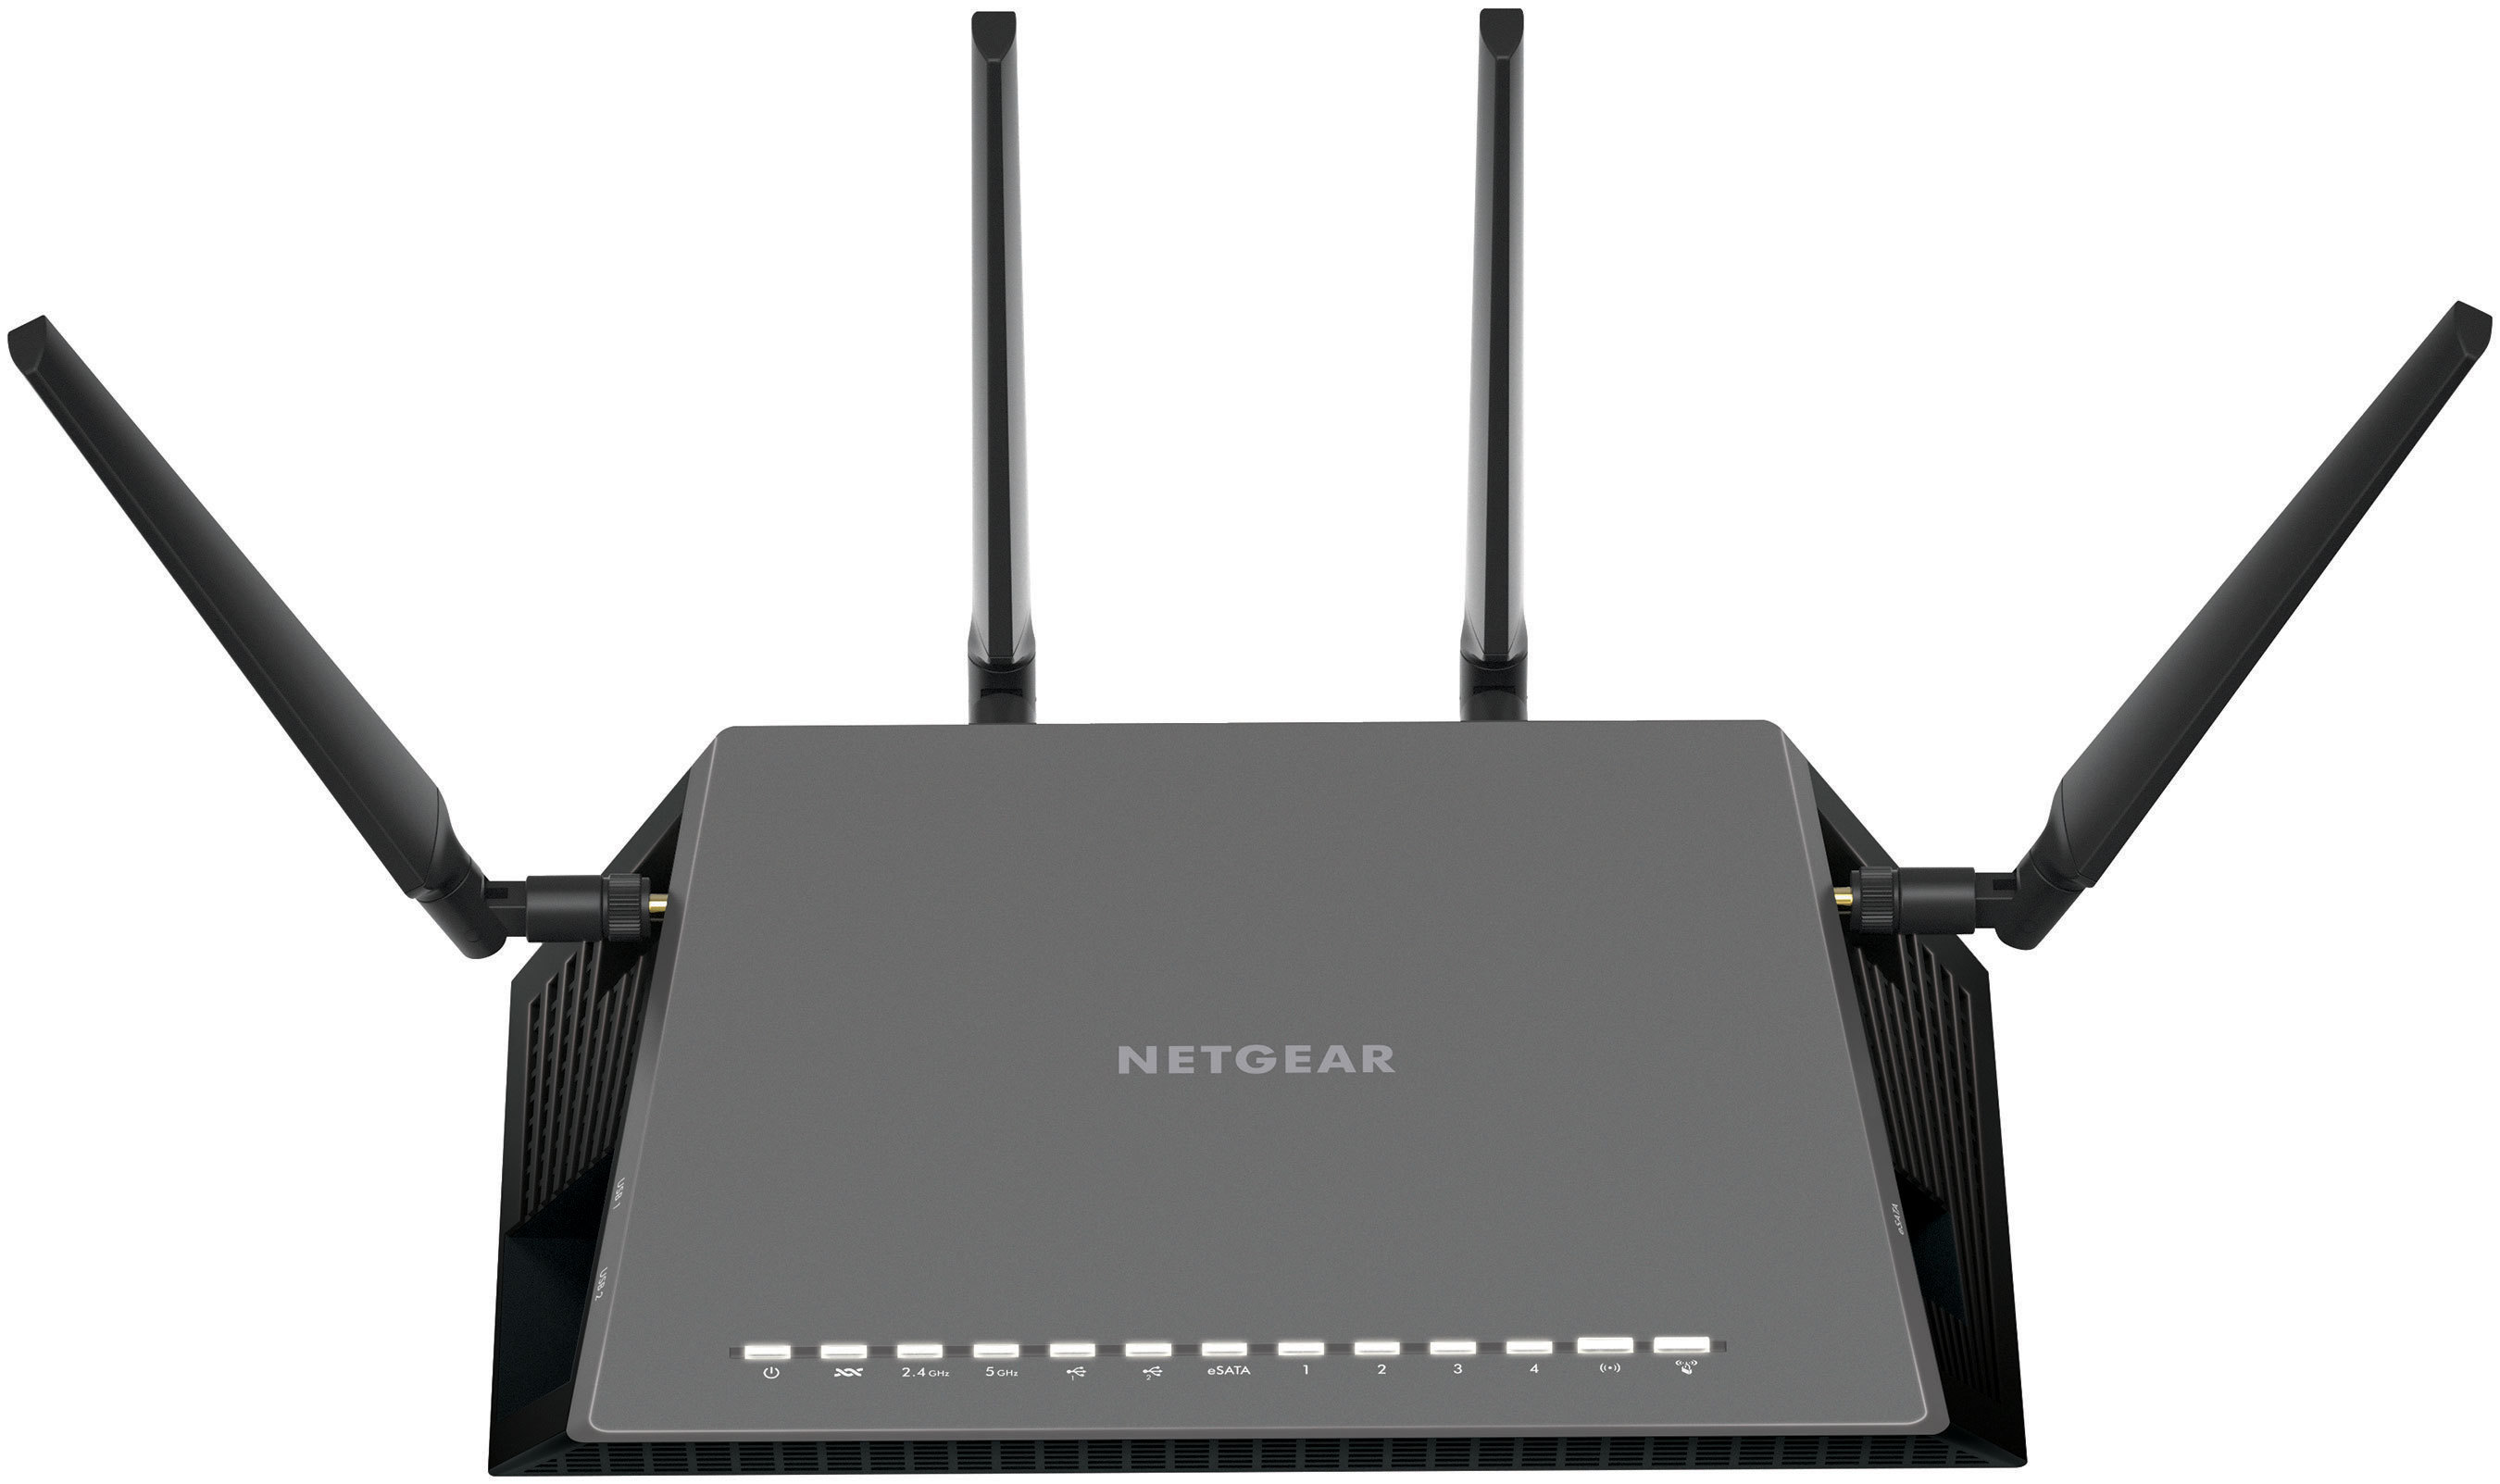 Teken een foto Wat dan ook touw NETGEAR Launches Nighthawk X4S, First VDSL/ADSL Modem Router With Both  MU-MIMO and Quad-Stream WiFi | Business Wire